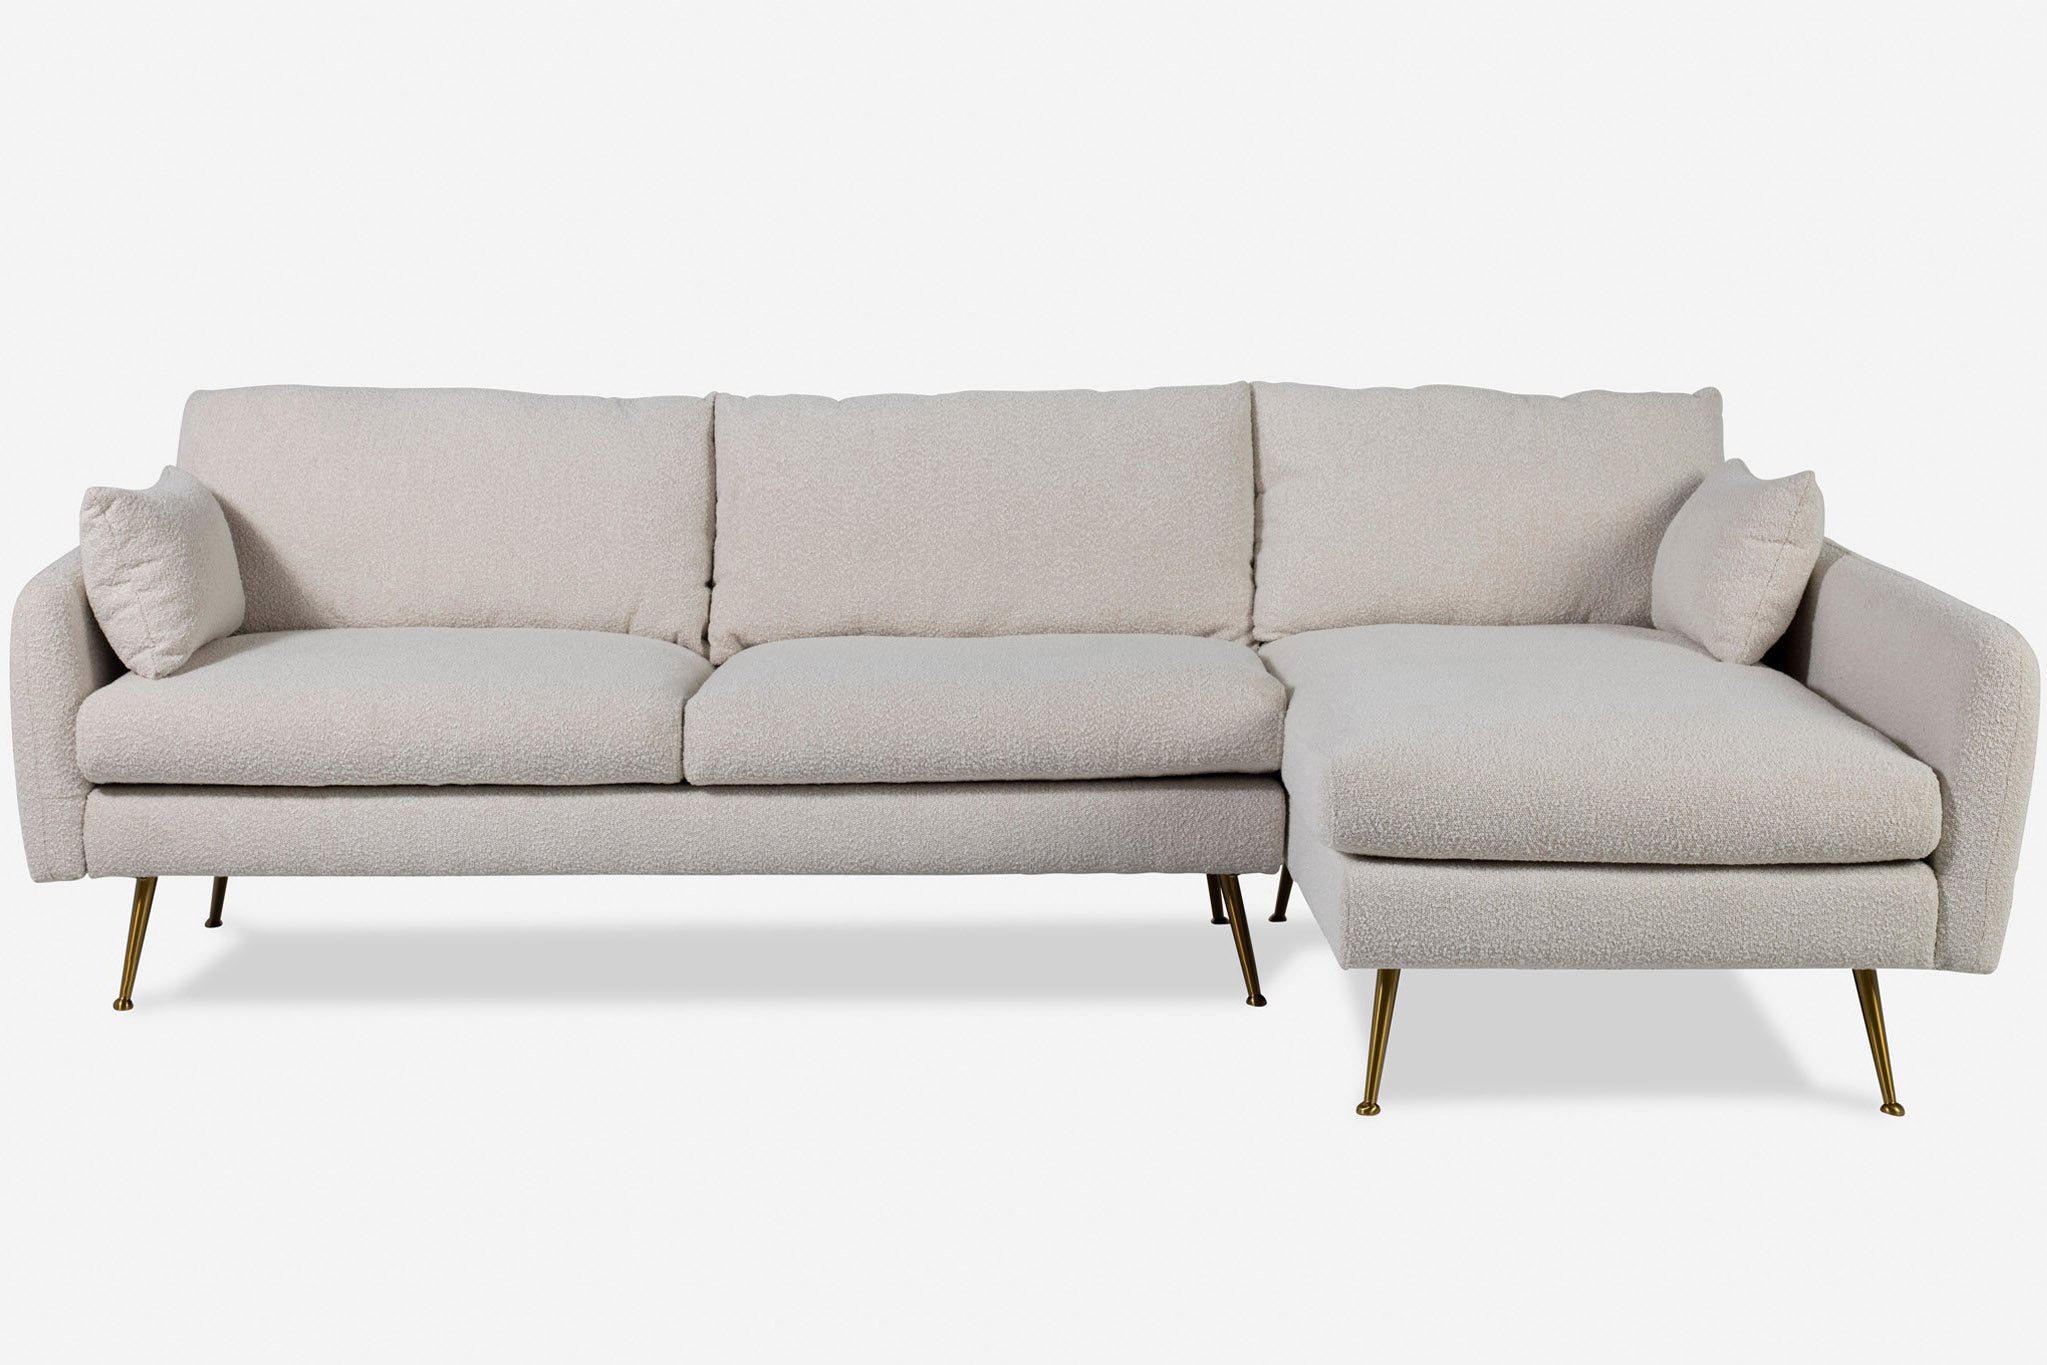 park sectional sofa shown in bouclé with gold legs right facing